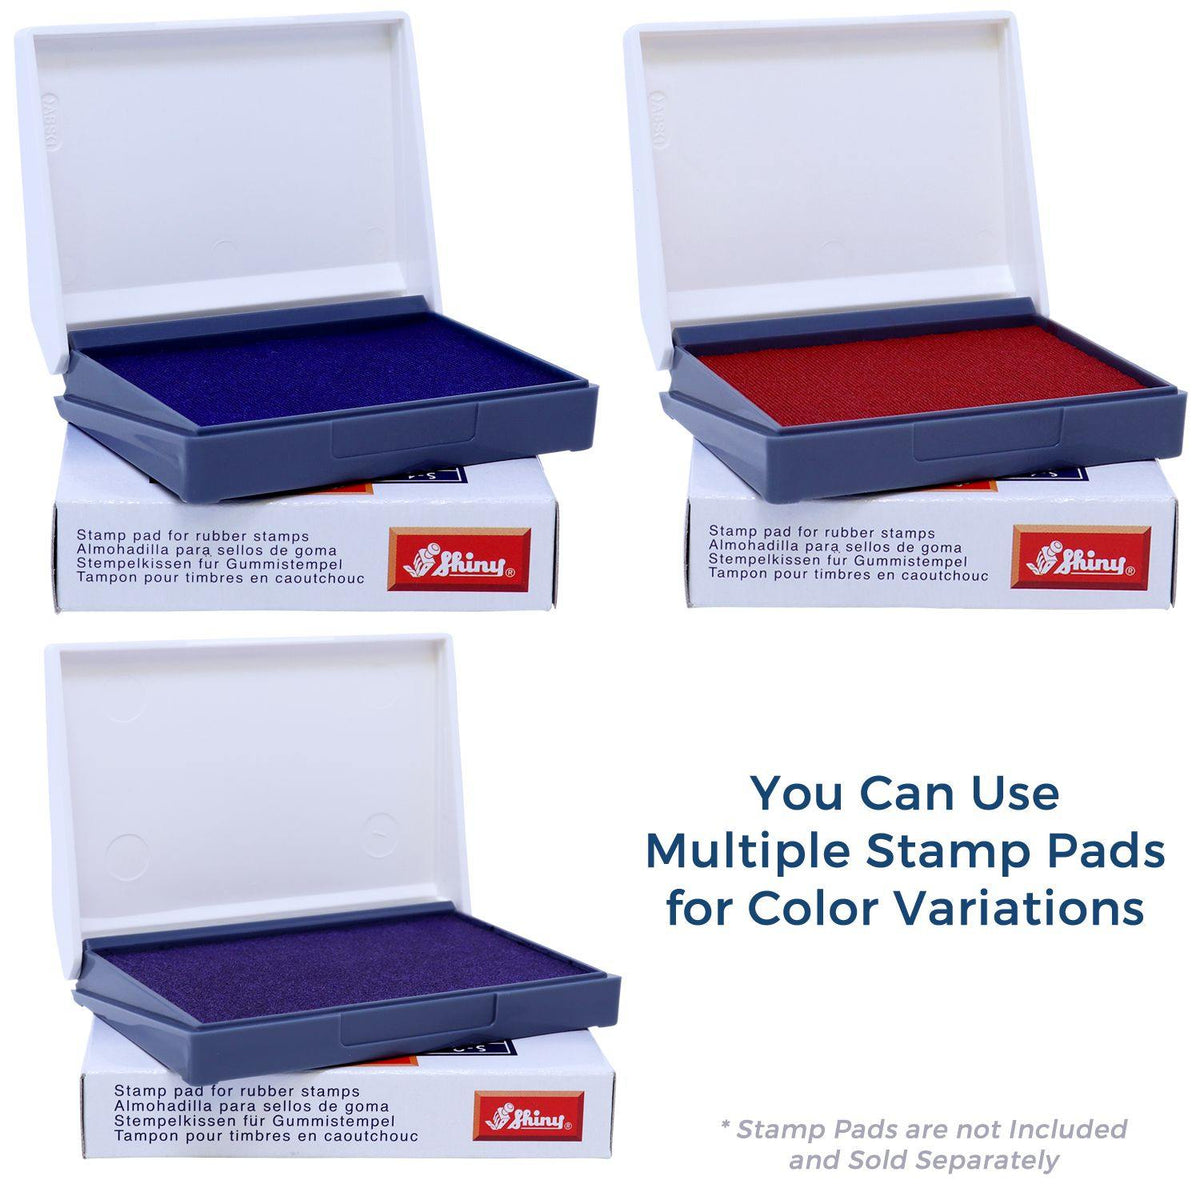 Stamp Pads for Large Advanced Placement Rubber Stamp Available